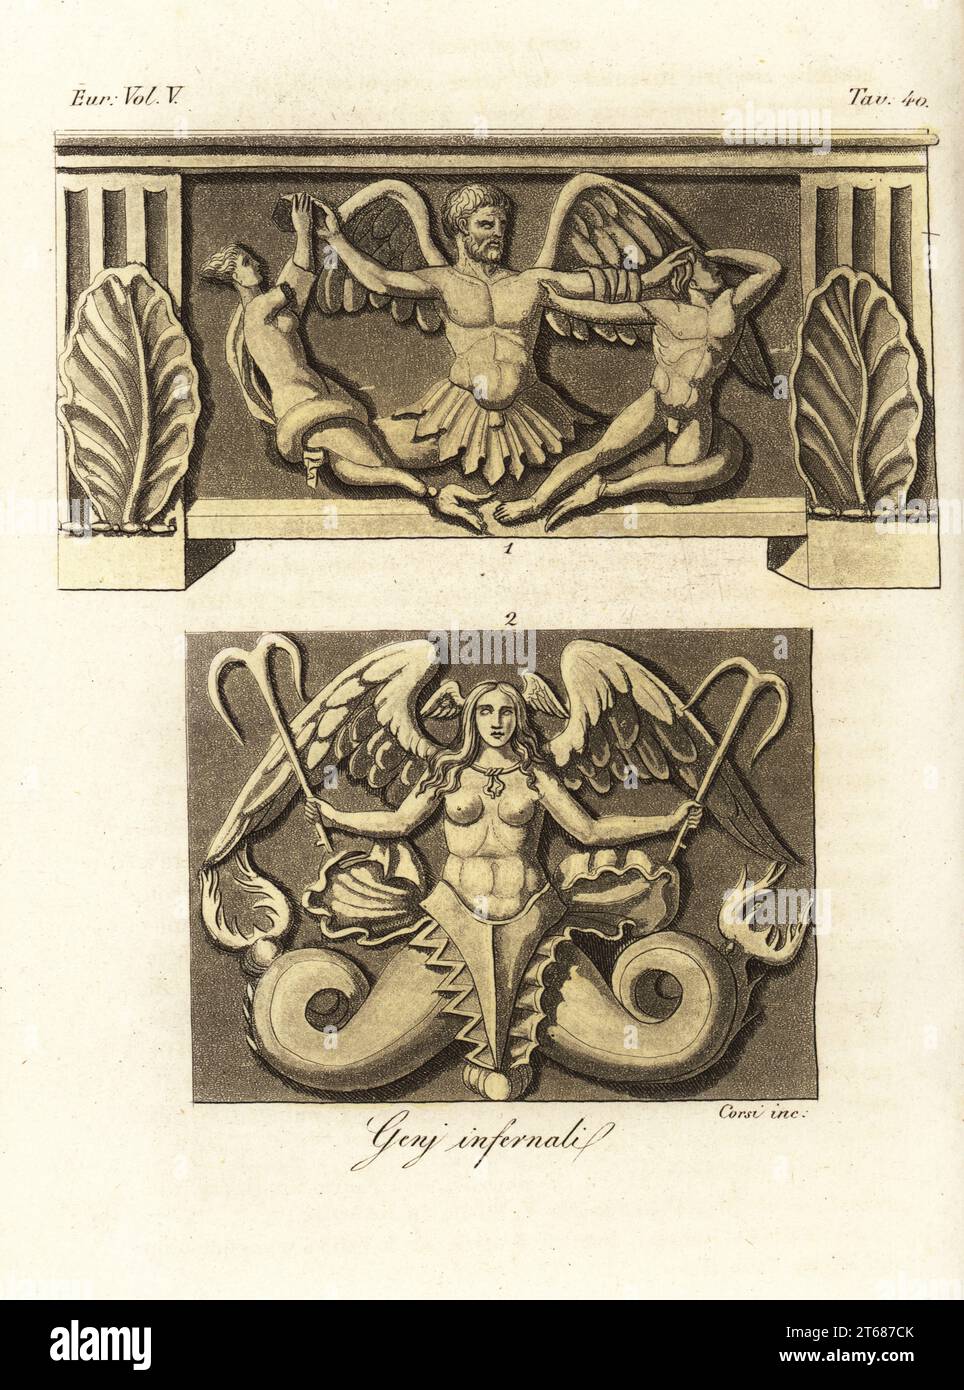 Ancient Etruscan chimera. A winged marine demon with fish tail limbs tormenting a man and woman 1, and Scylla an infernal winged mermaid with giant hooks 2. Geni infernali. Handcoloured copperplate engraving by Corsi from Giulio Ferrarios Costumes Ancient and Modern of the Peoples of the World, Il Costume Antico e Moderno, Florence, 1843. Stock Photo